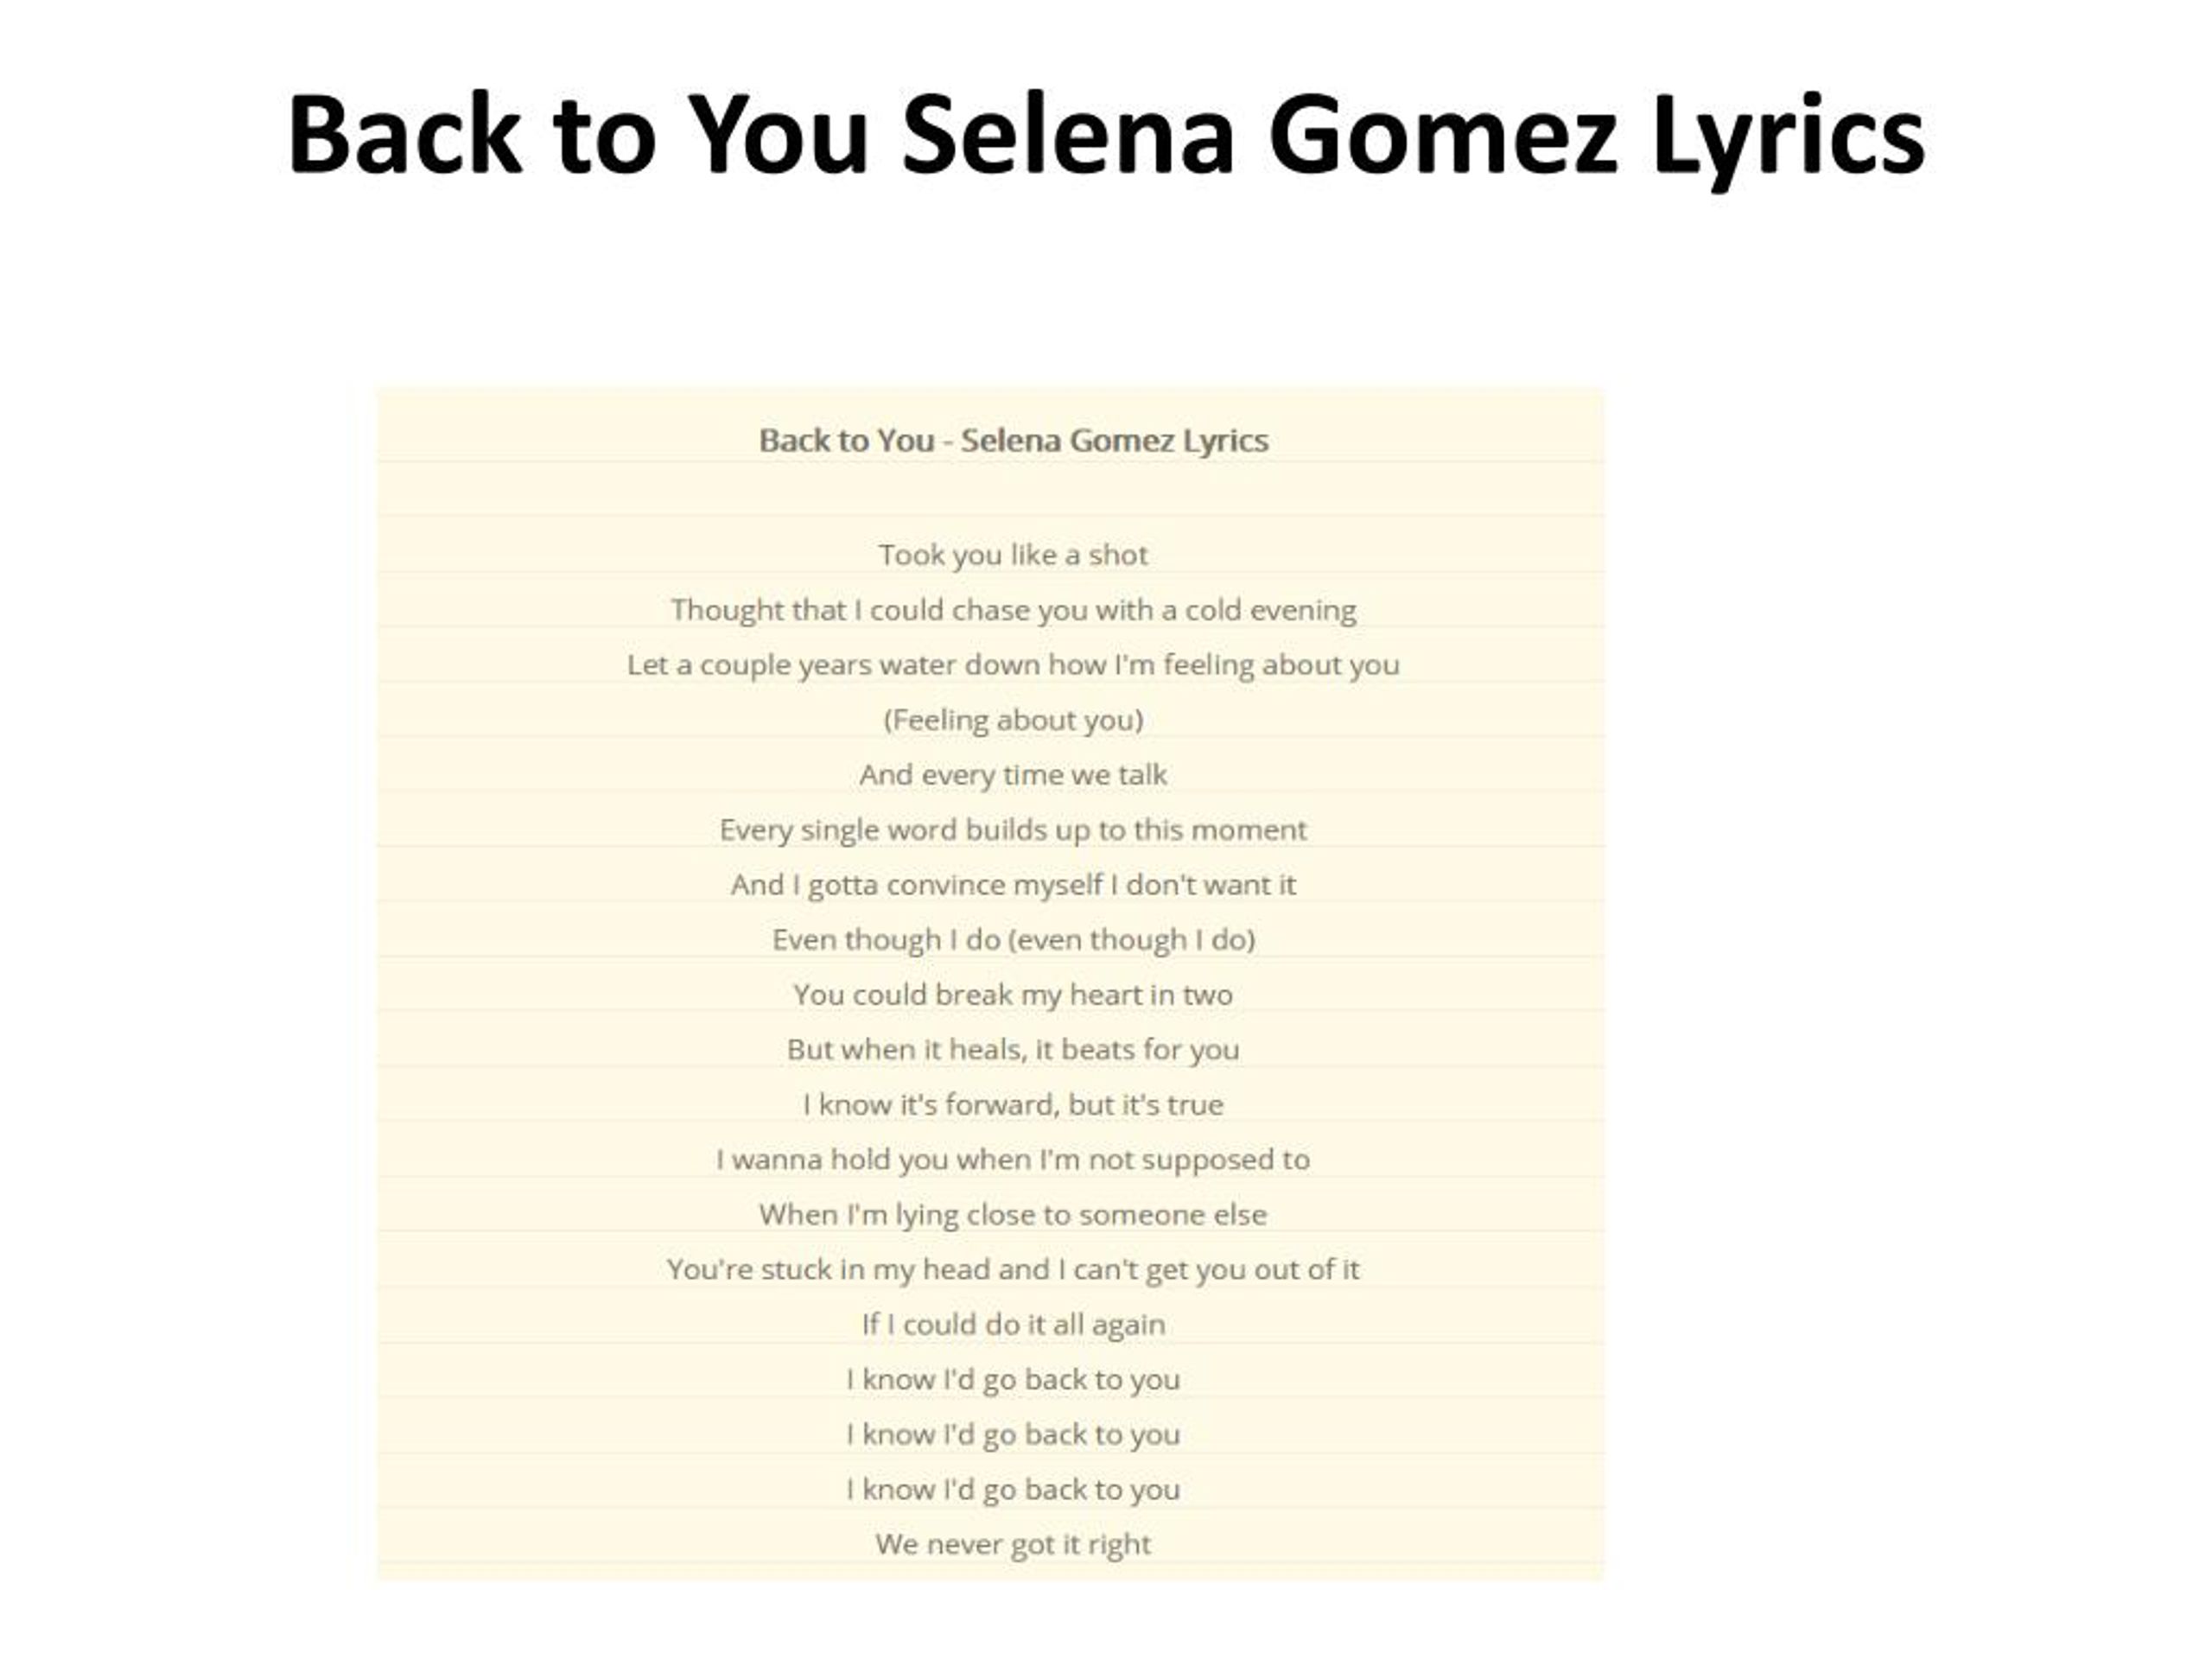 Came back текст. Back to you selena текст. Back to you перевод.